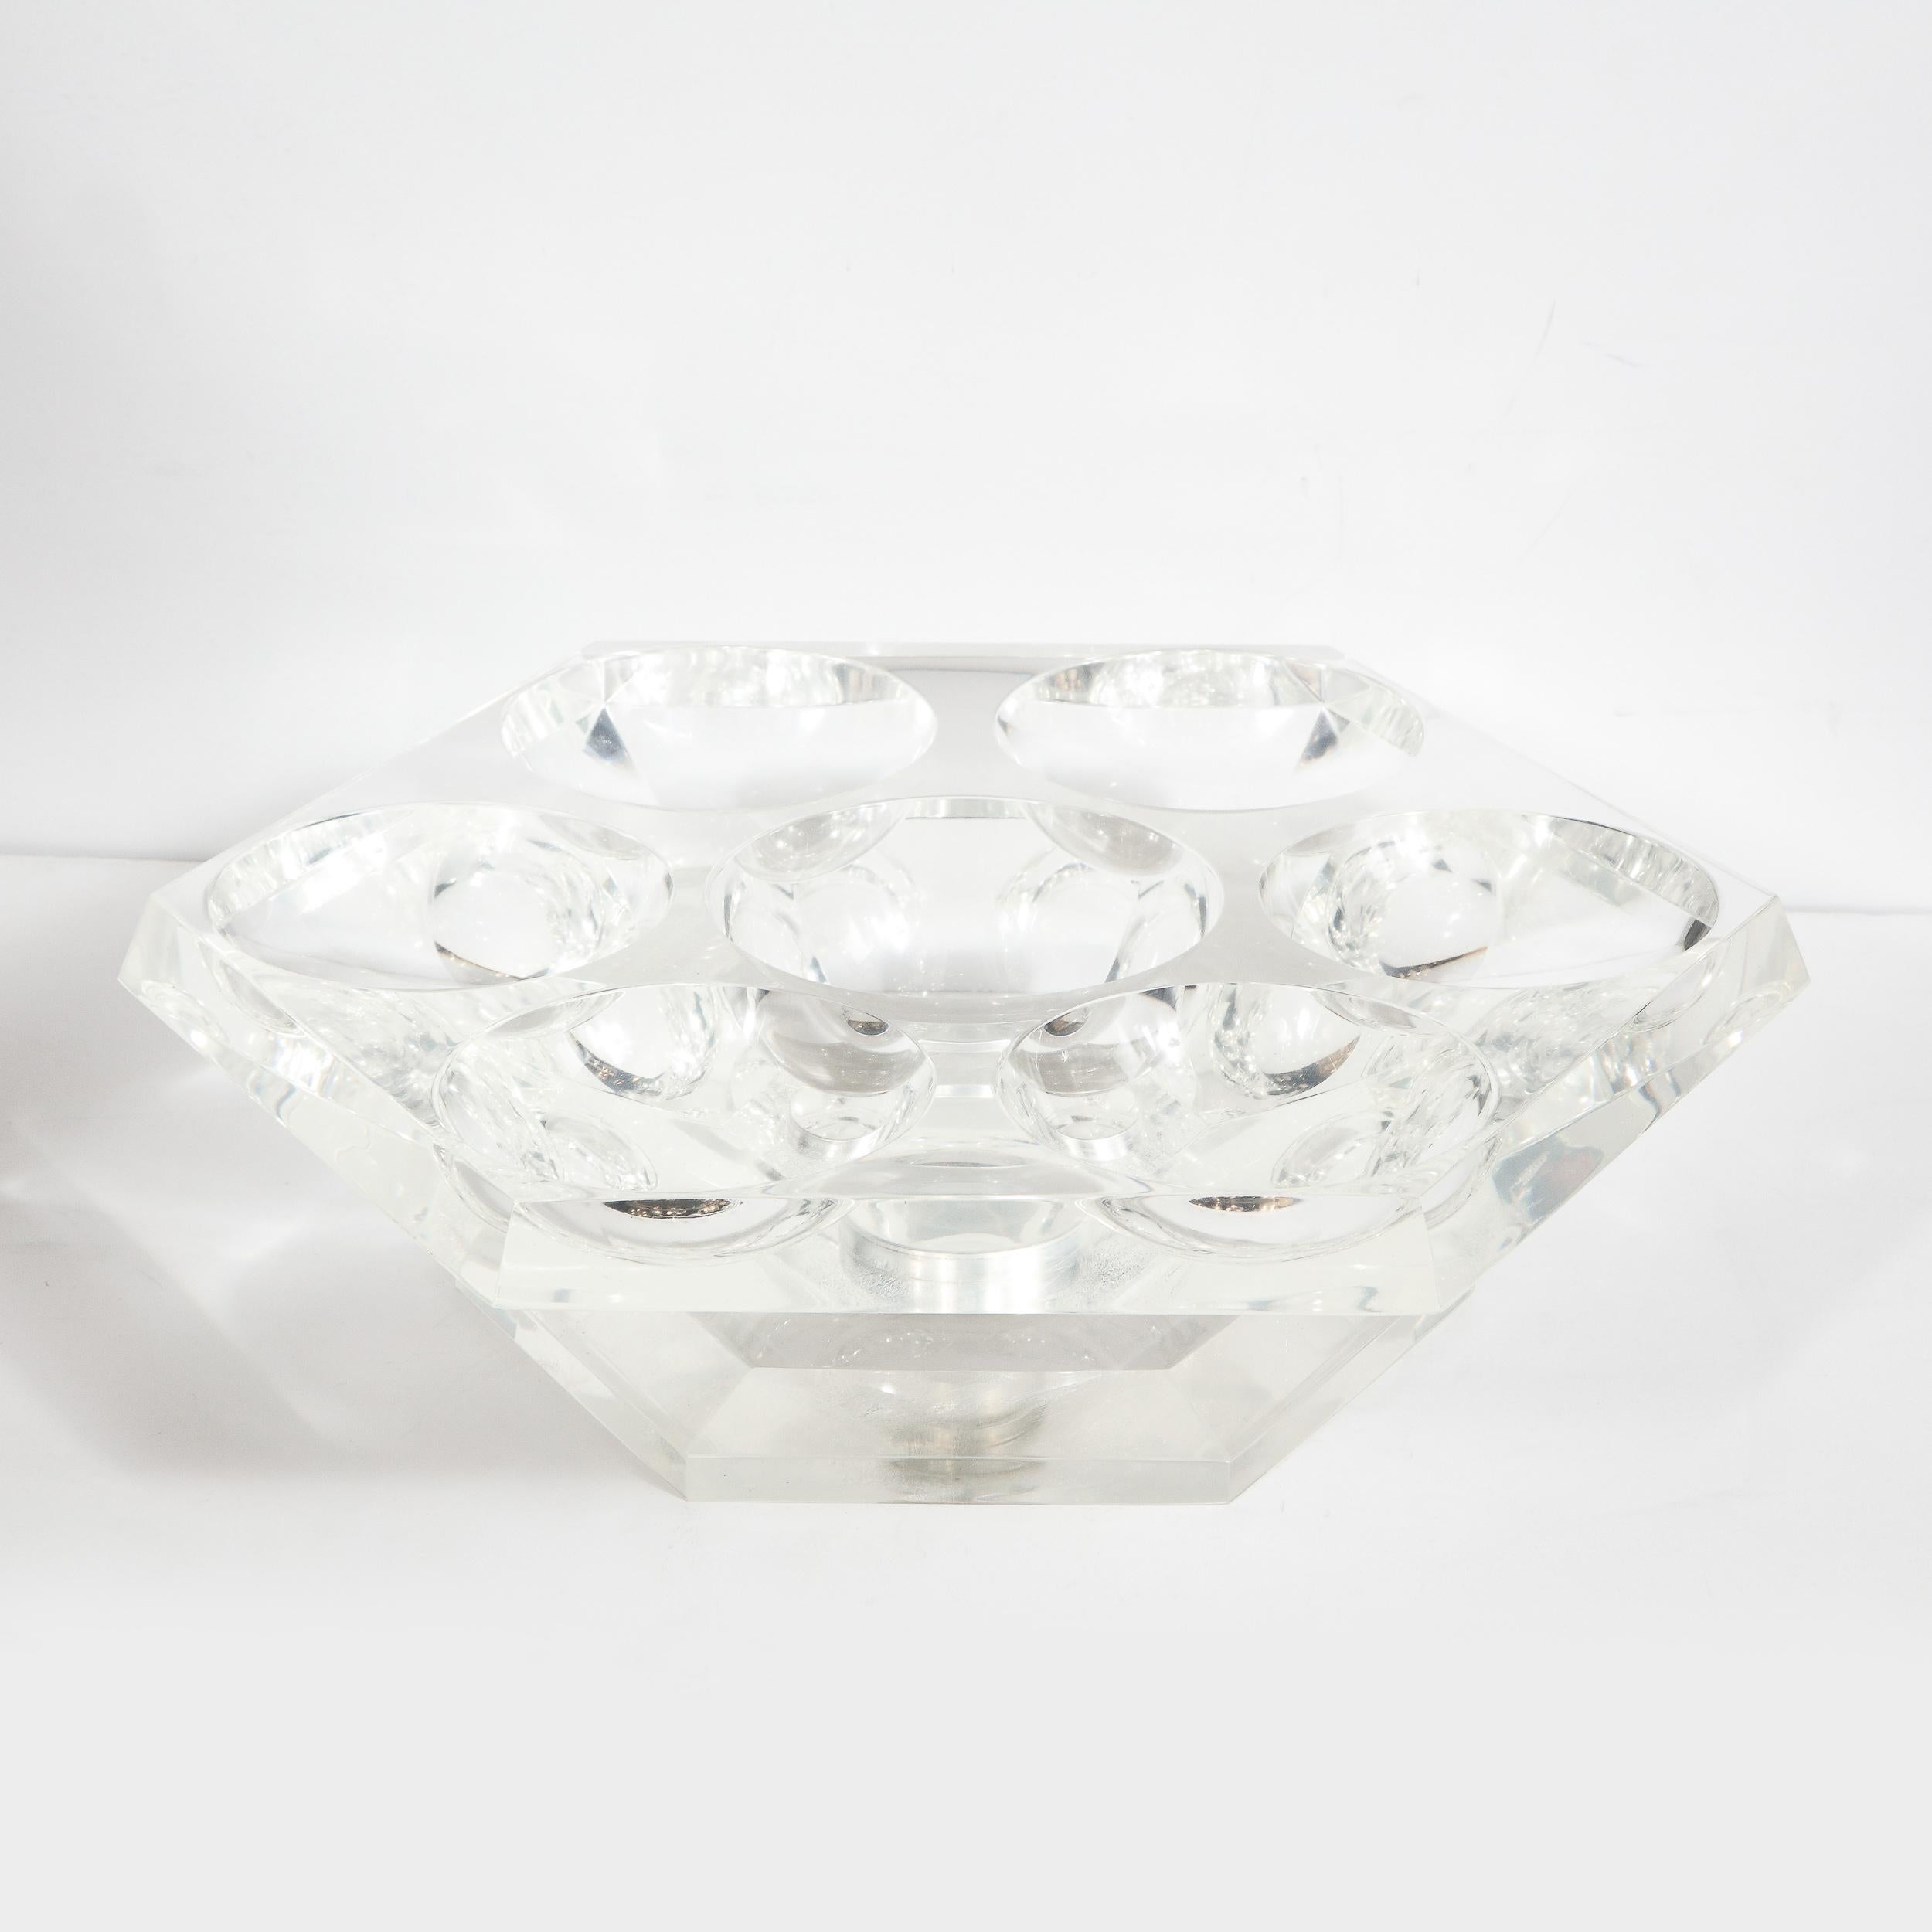 This elegant Mid-Century Modern rotating tray was realized in the United States, circa 1970. It features a hexagonal form with a large concave circular indentation in the center surrounded by six smaller circular indentations perfect for serving-